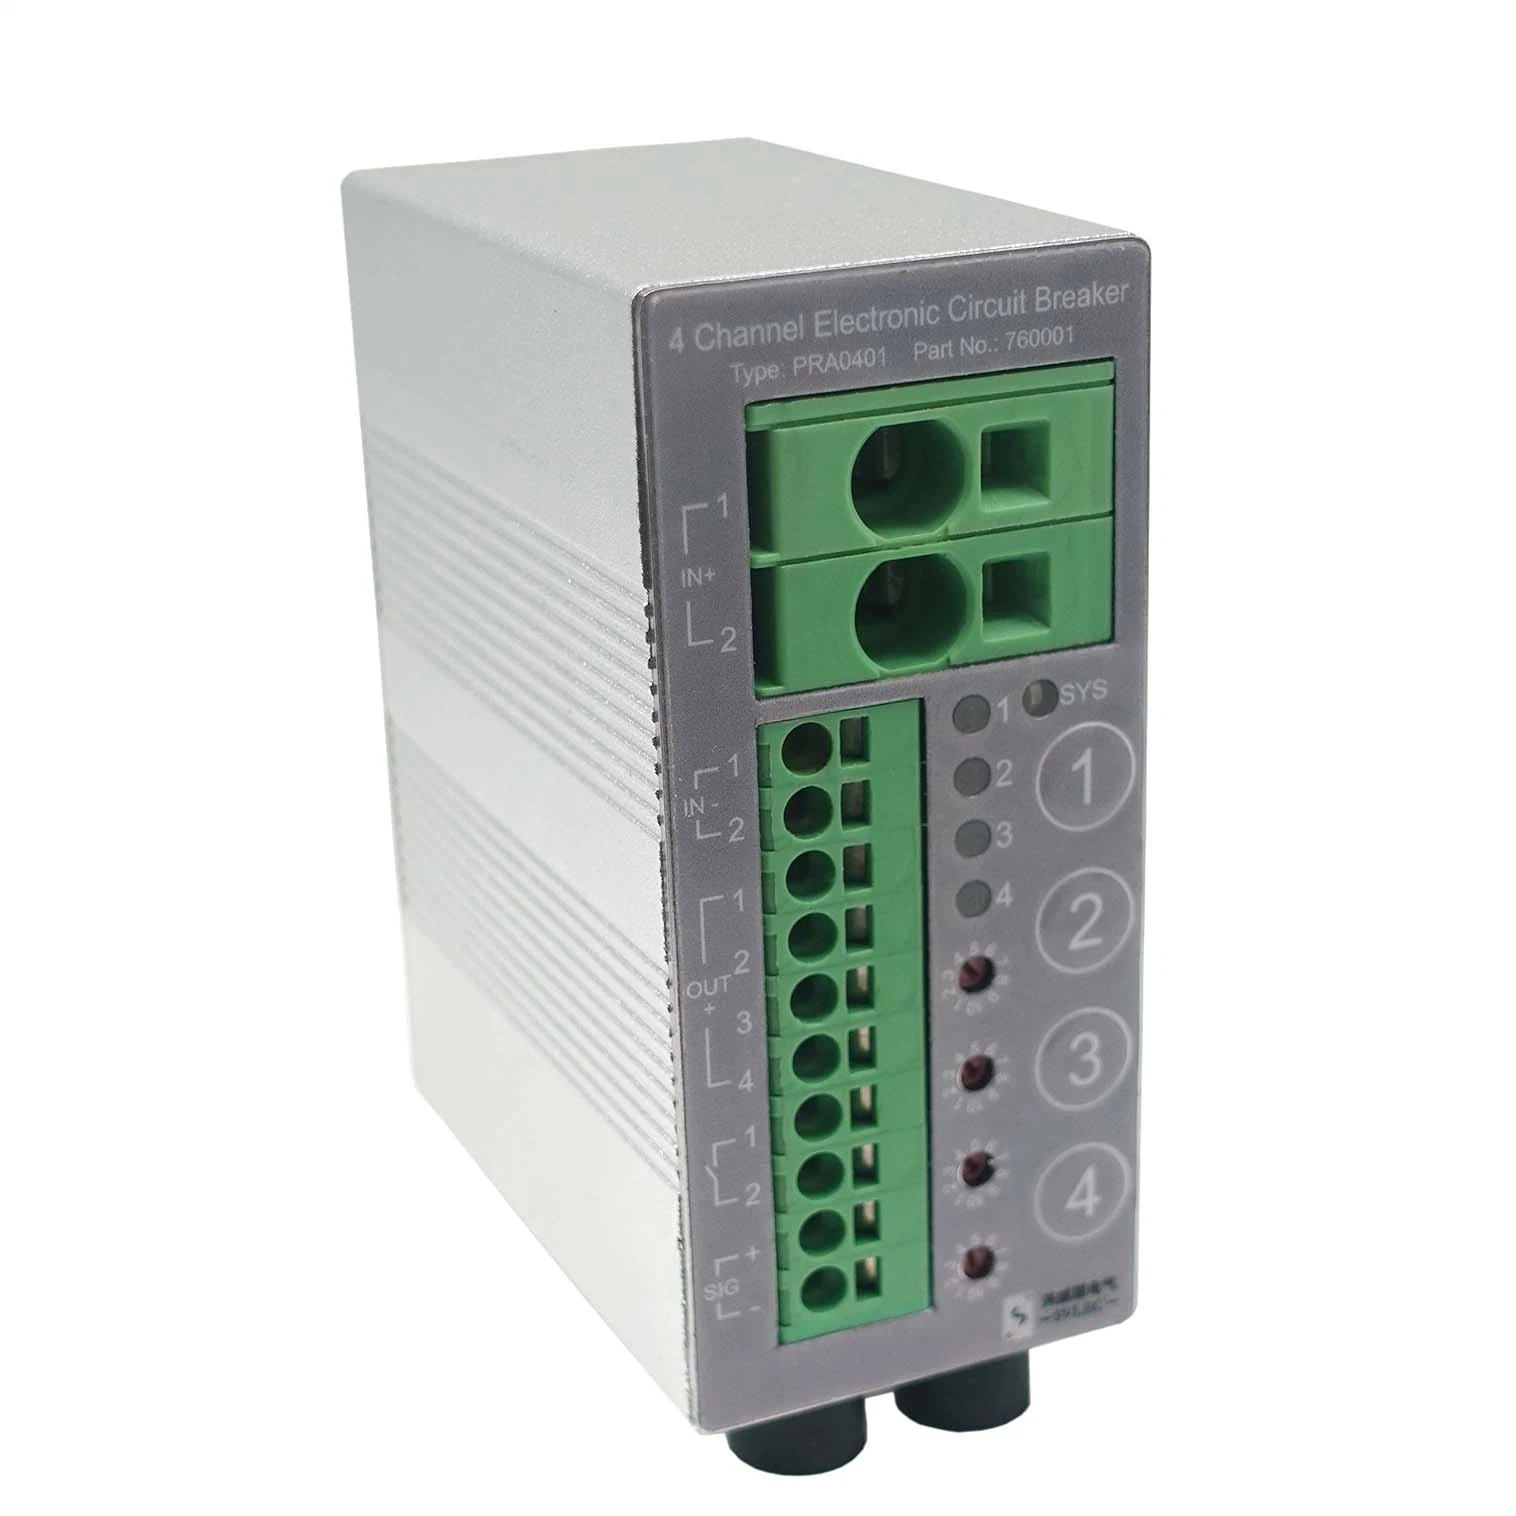 Svlec Multi-Channel Electronic Circuit Breaker for Protecting Four Loads at 24 V DC in The Event of Overload and Short Circuit.